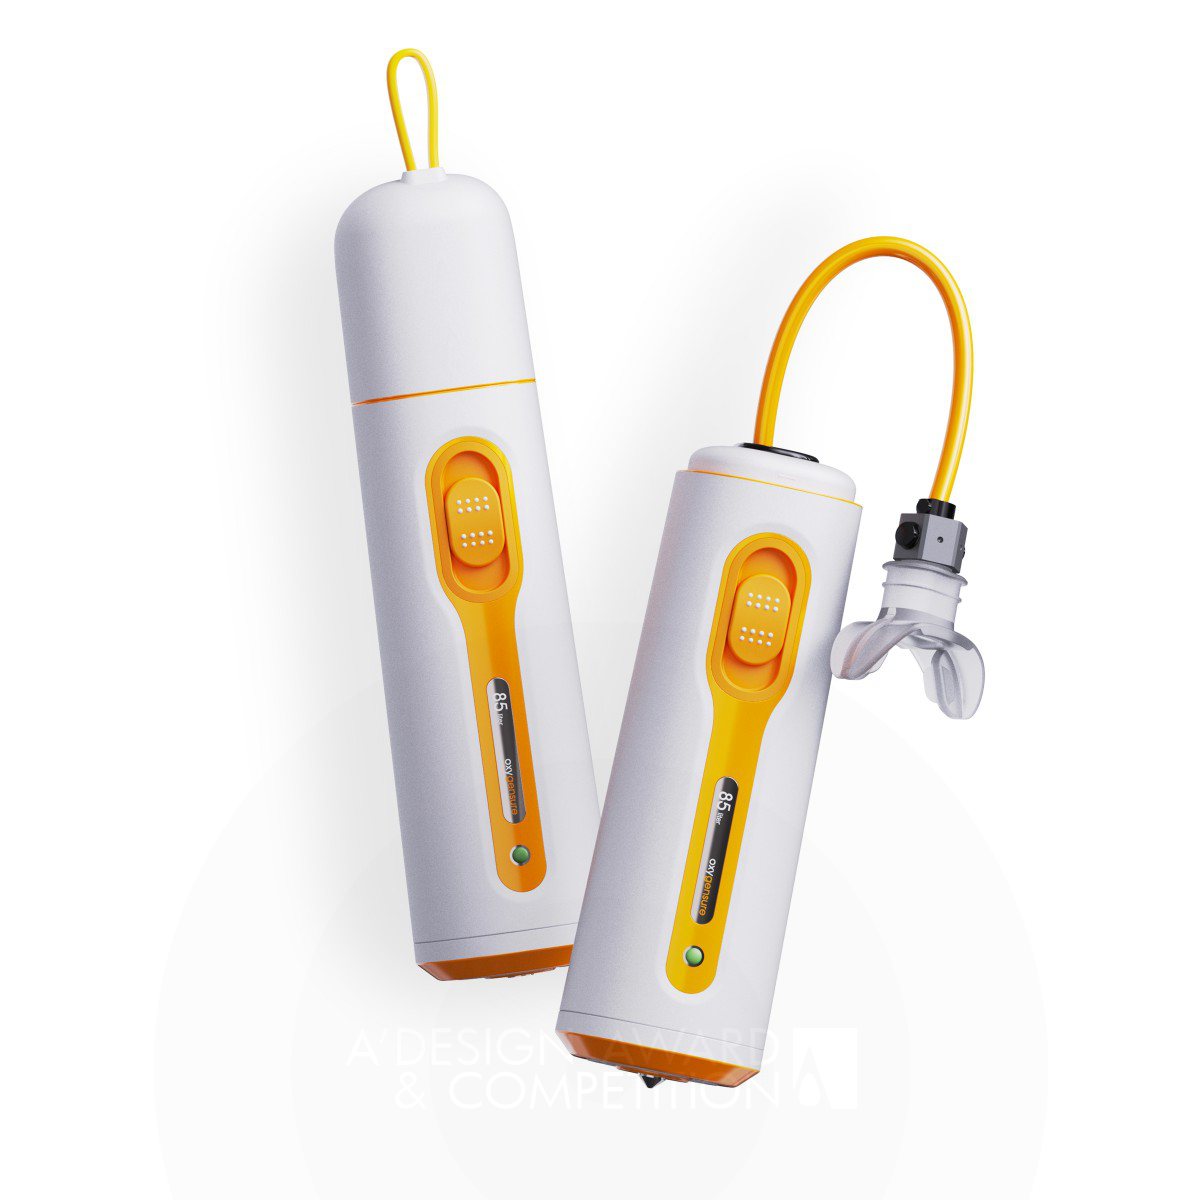 Jianing Dong wins Iron at the prestigious A' Security, Safety and Surveillance Products Design Award with Oxygensure Rescue Bottle with Oxygen Cylinder .